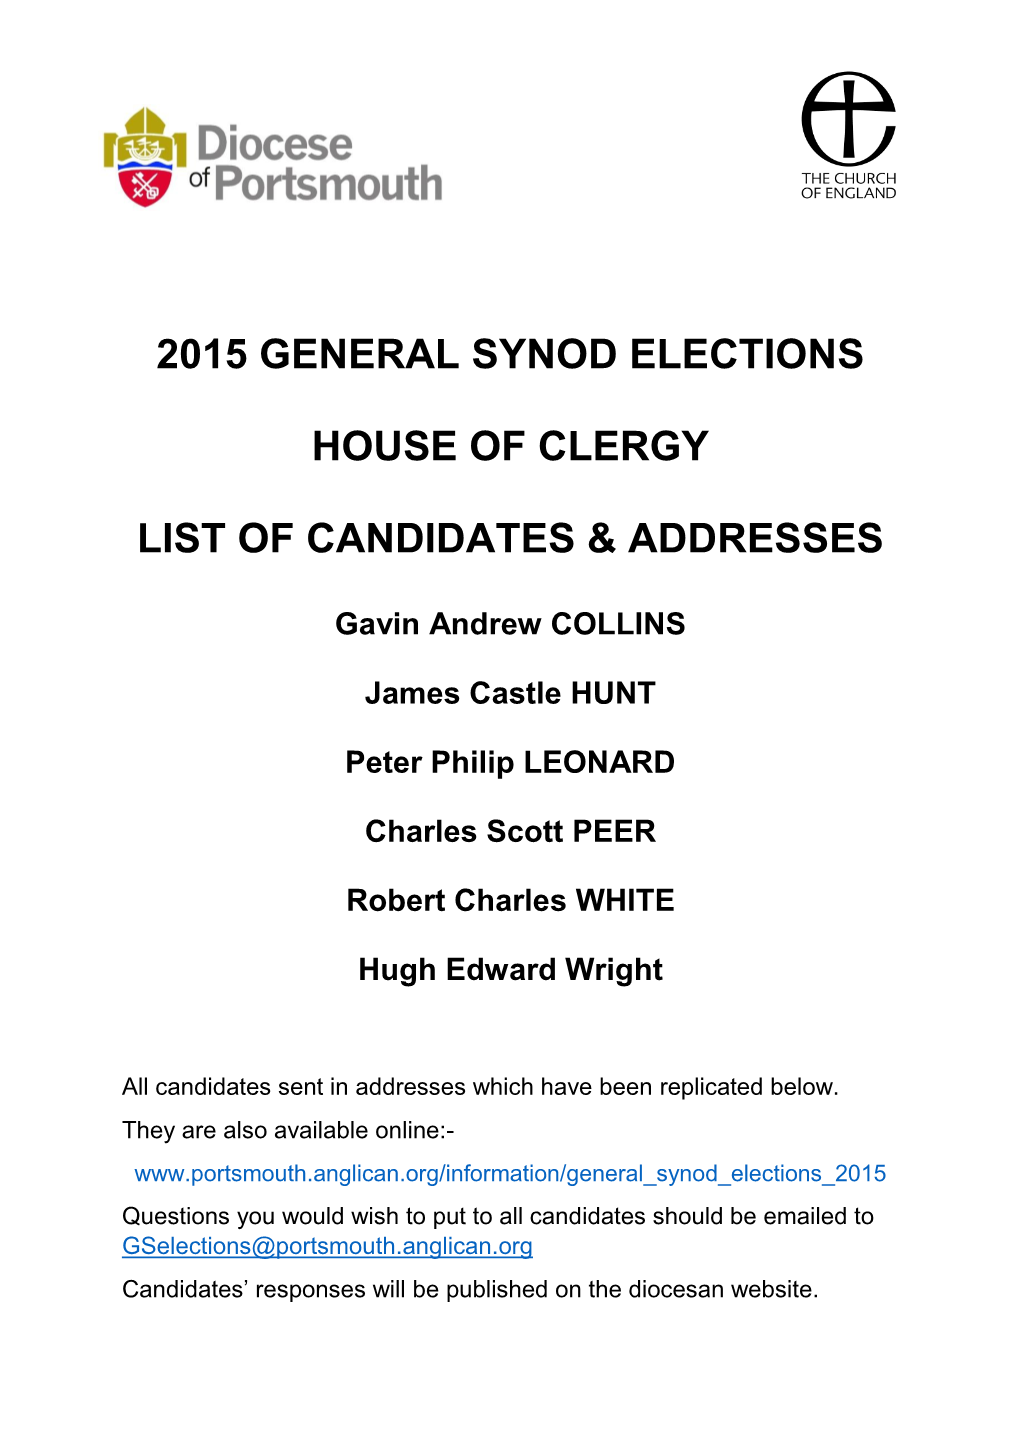 2015 General Synod Elections House of Clergy List of Candidates & Addresses